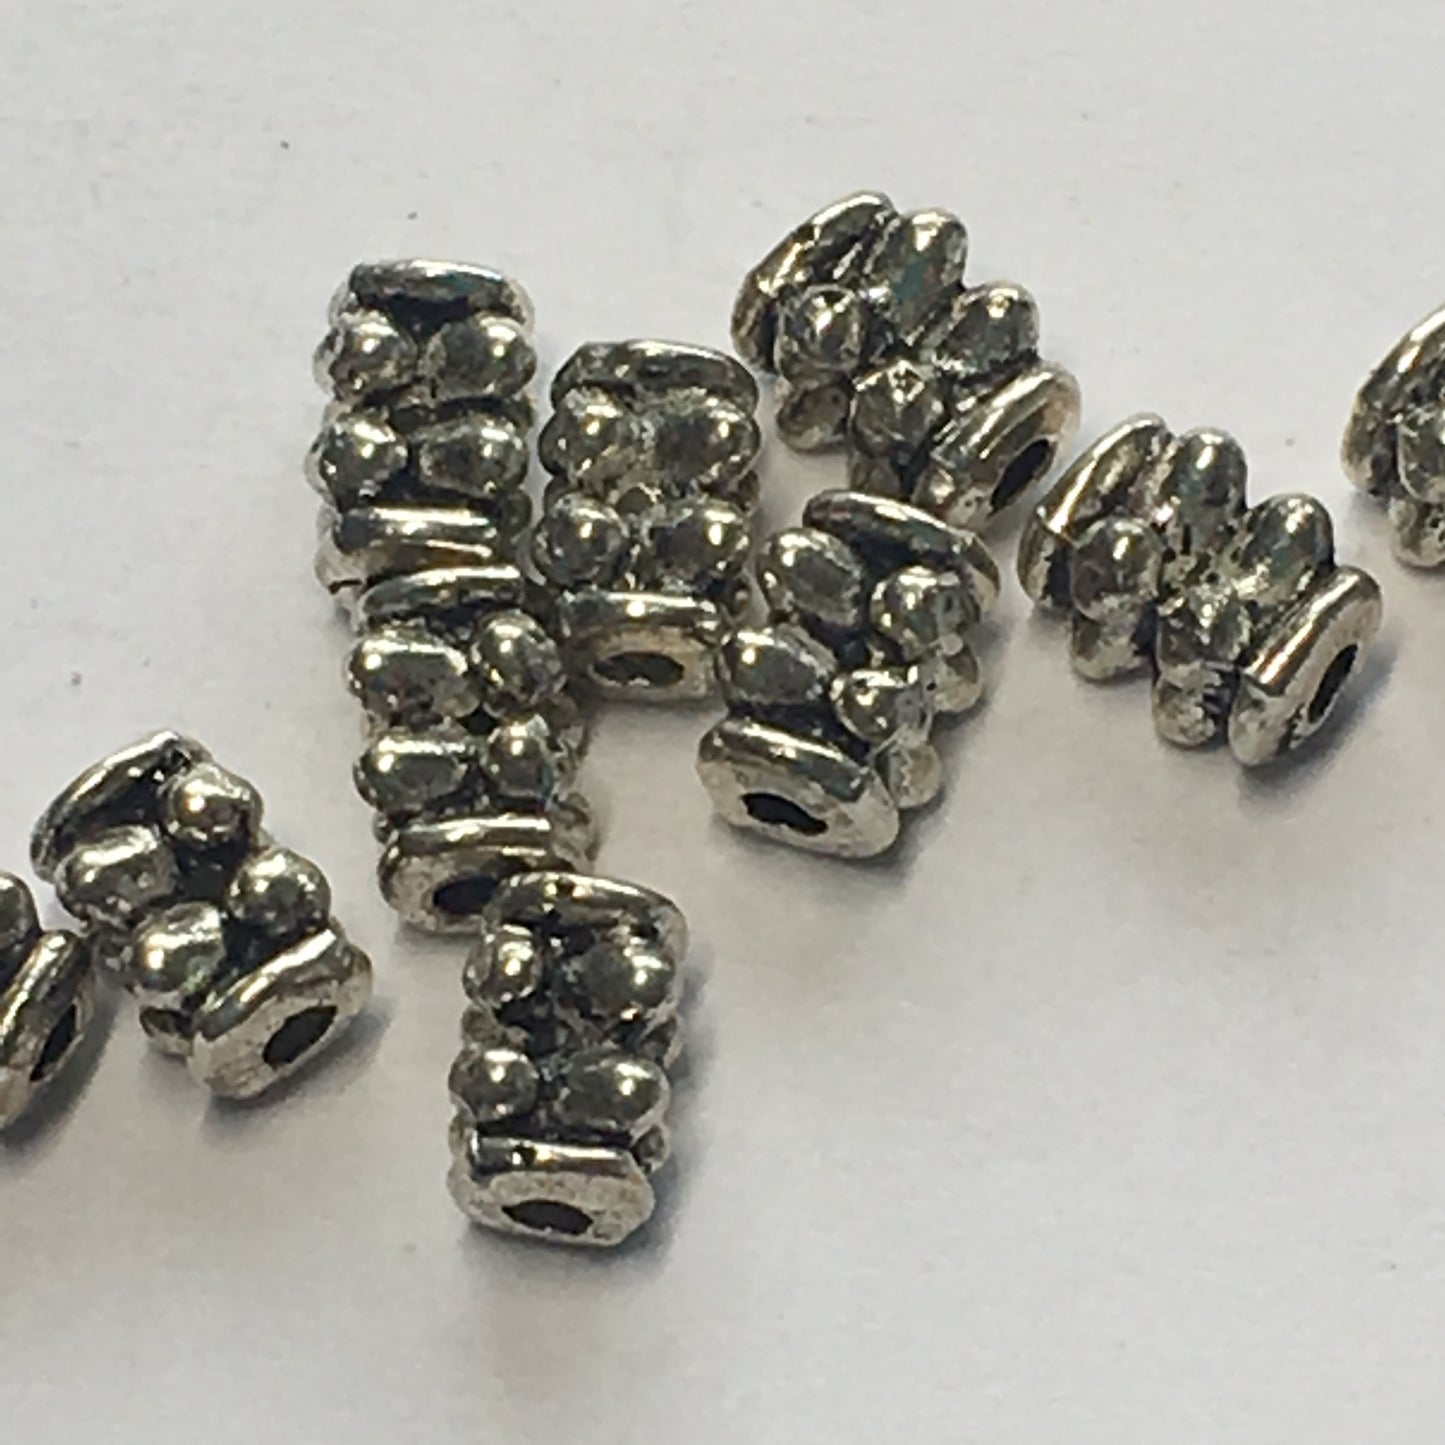 Antique Silver Rectangle Bali Beads, 6 x 4 mm - 8 or 10 Beads